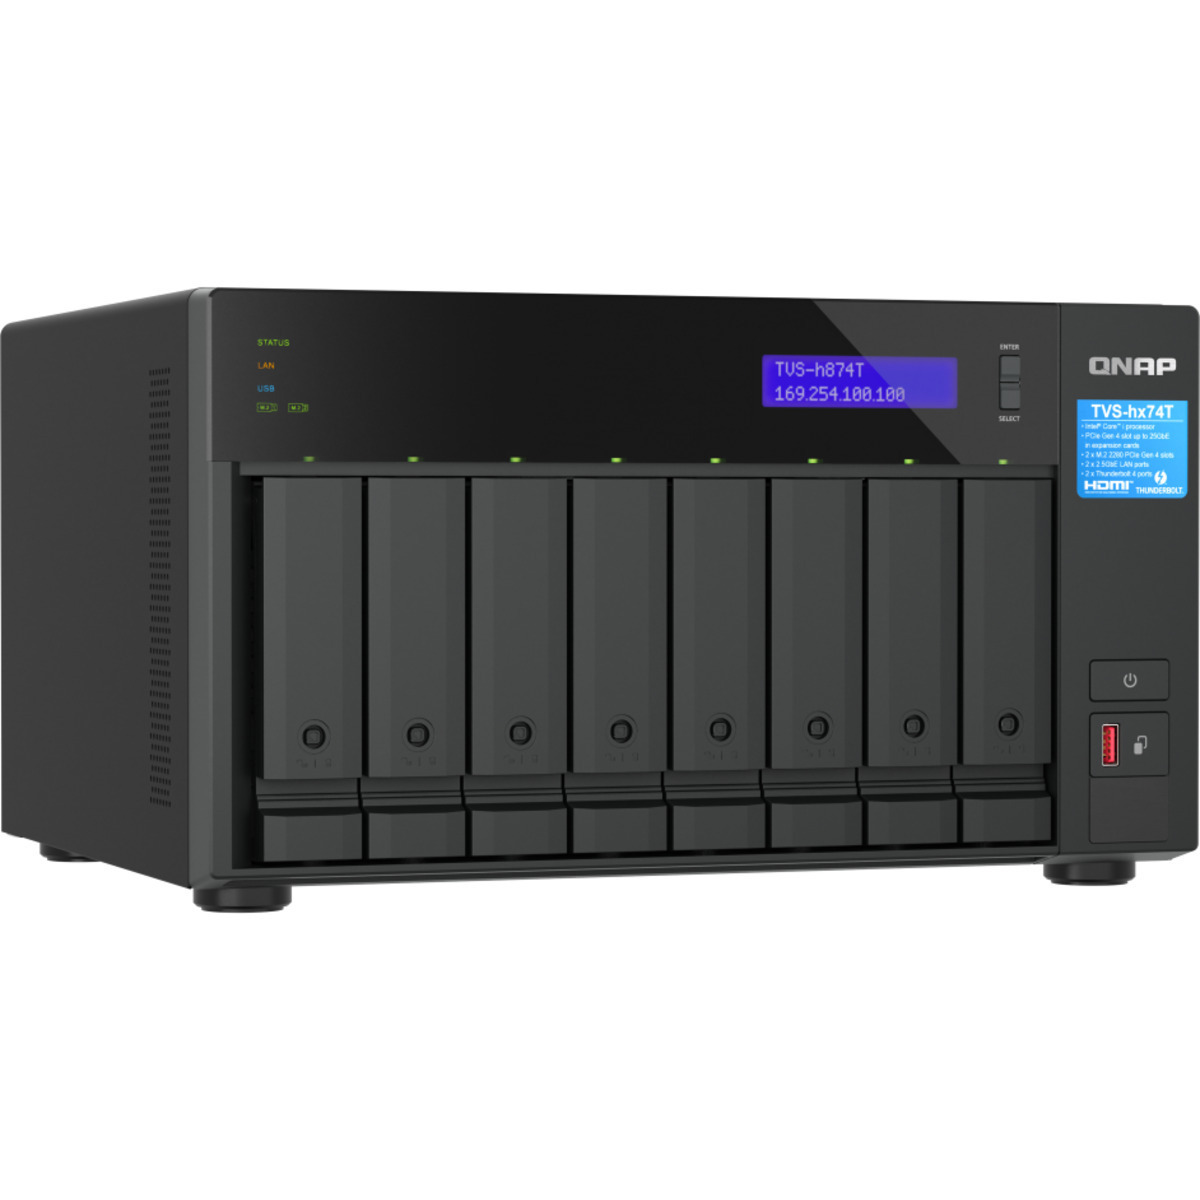 QNAP TVS-h874T Core i9 Thunderbolt 4 88tb 8-Bay Desktop Multimedia / Power User / Business DAS-NAS - Combo Direct + Network Storage Device 4x22tb Western Digital Ultrastar HC580 SED WUH722422ALE6L1 3.5 7200rpm SATA 6Gb/s HDD ENTERPRISE Class Drives Installed - Burn-In Tested TVS-h874T Core i9 Thunderbolt 4